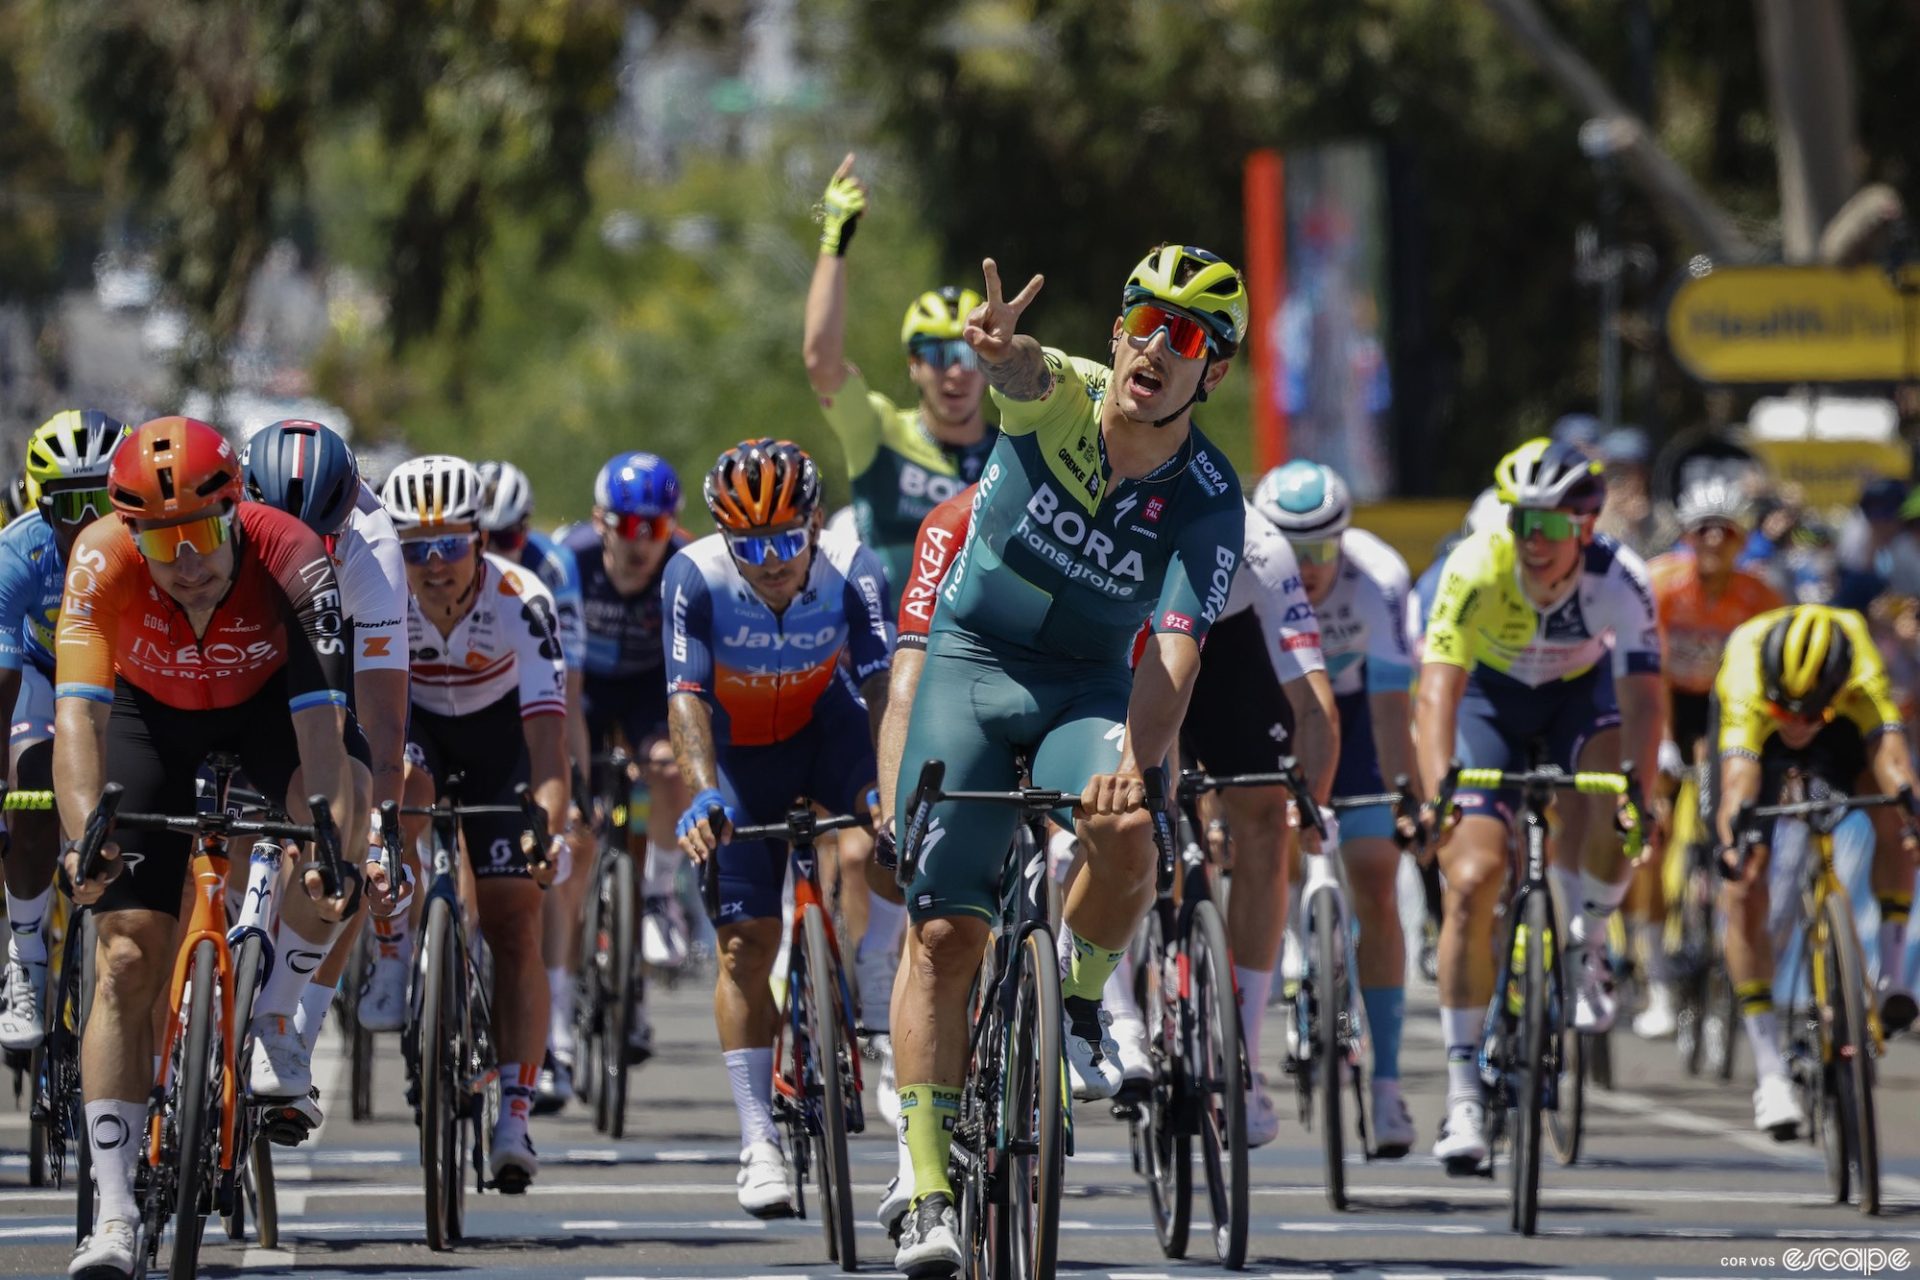 Sam Welsford wins stage 3 of the Tour Down Under.